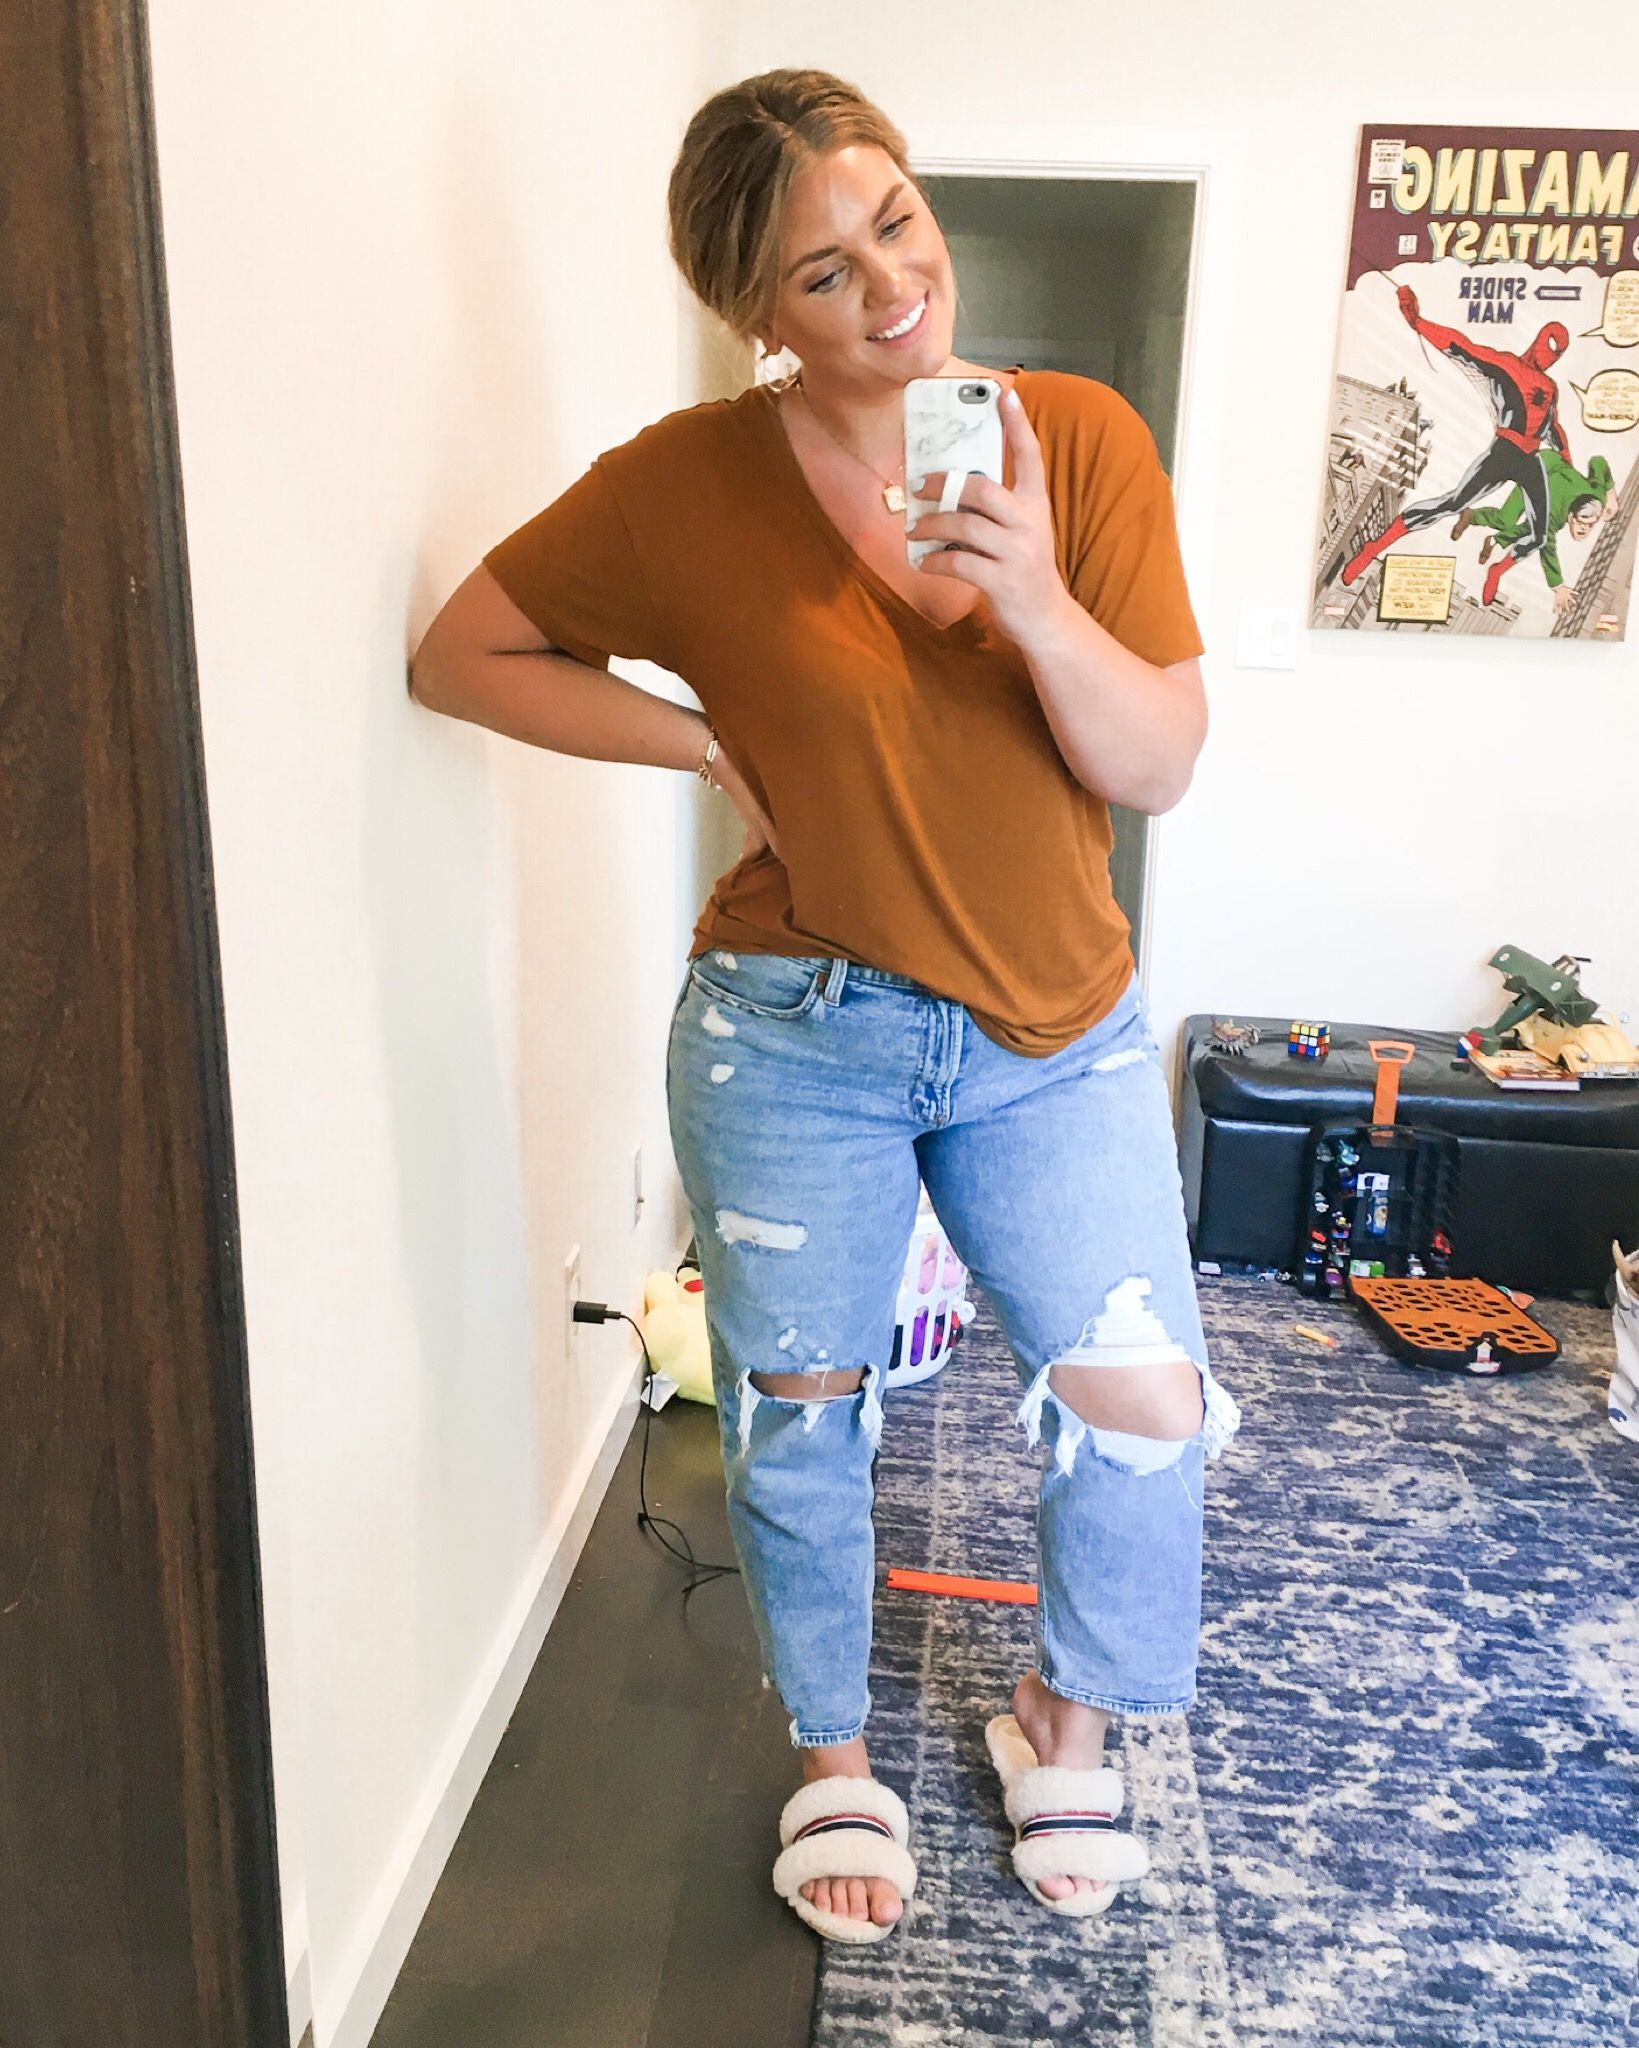 How to get the plus size boyfriend jeans
for you